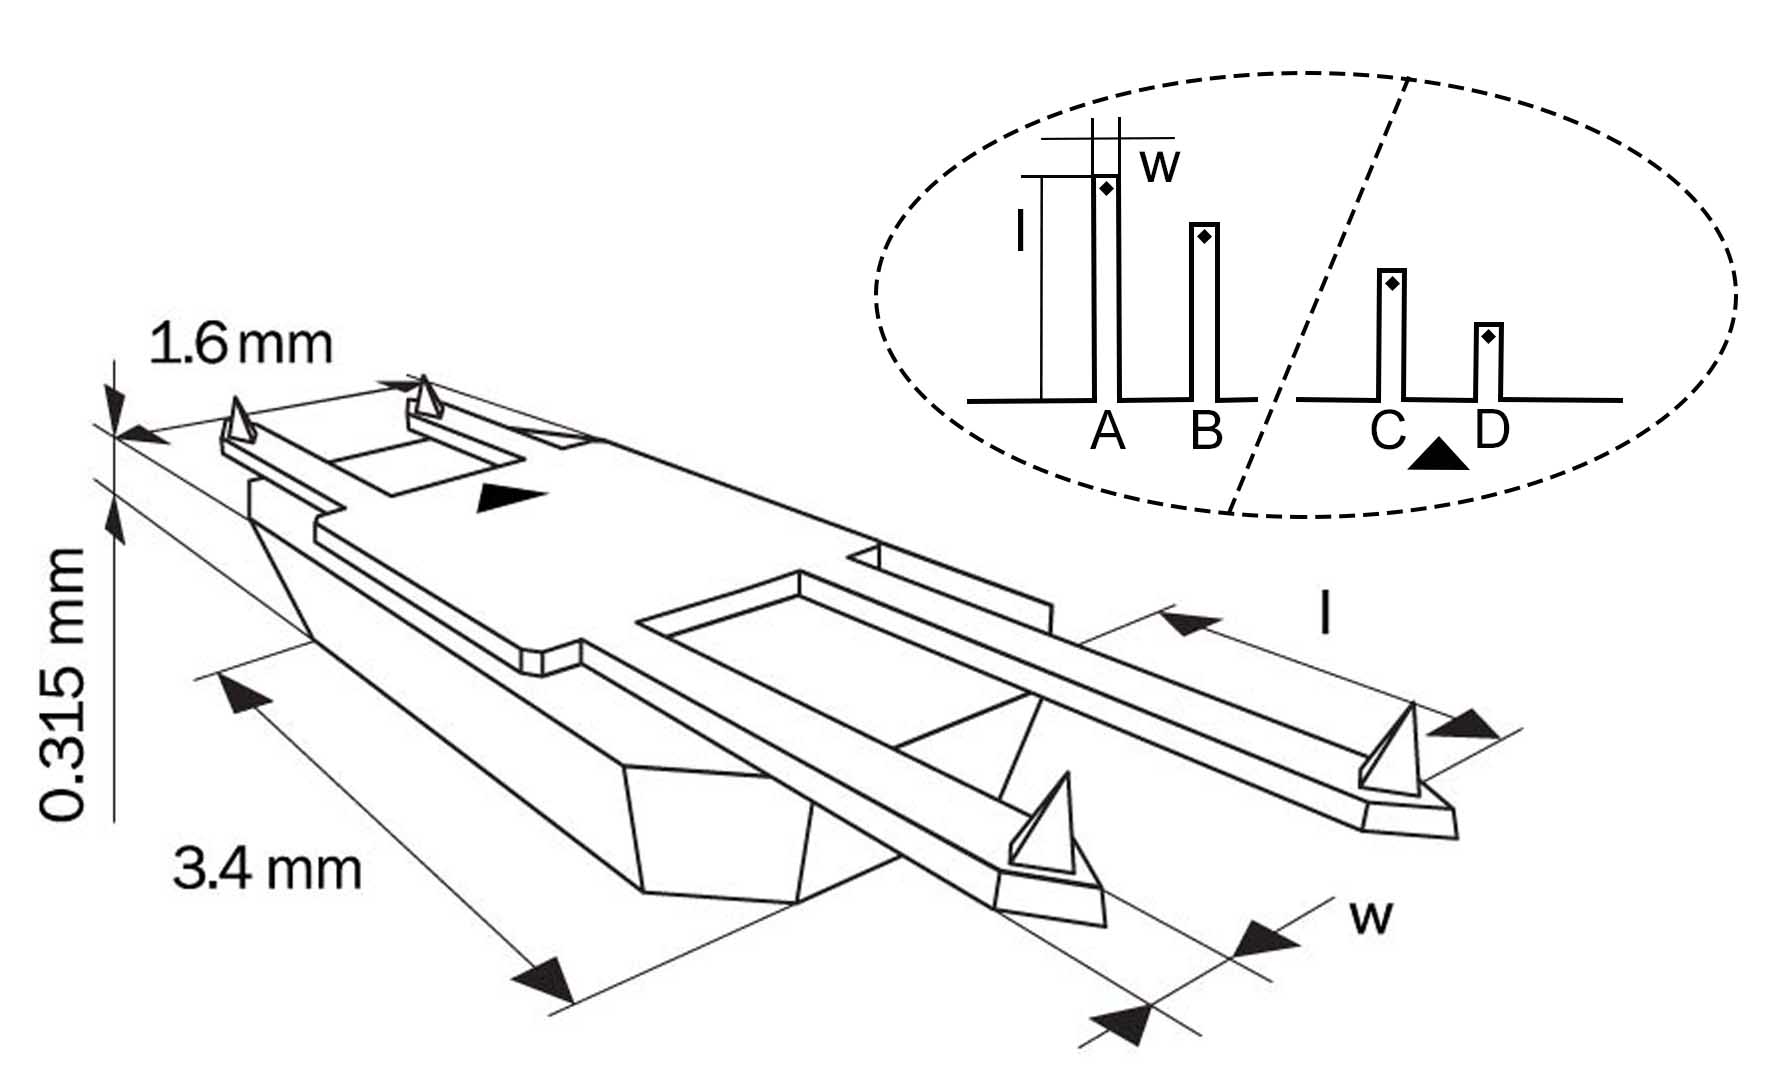 Schematic of 4 AFM cantilevers on HQ:XSC11 series AFM probe